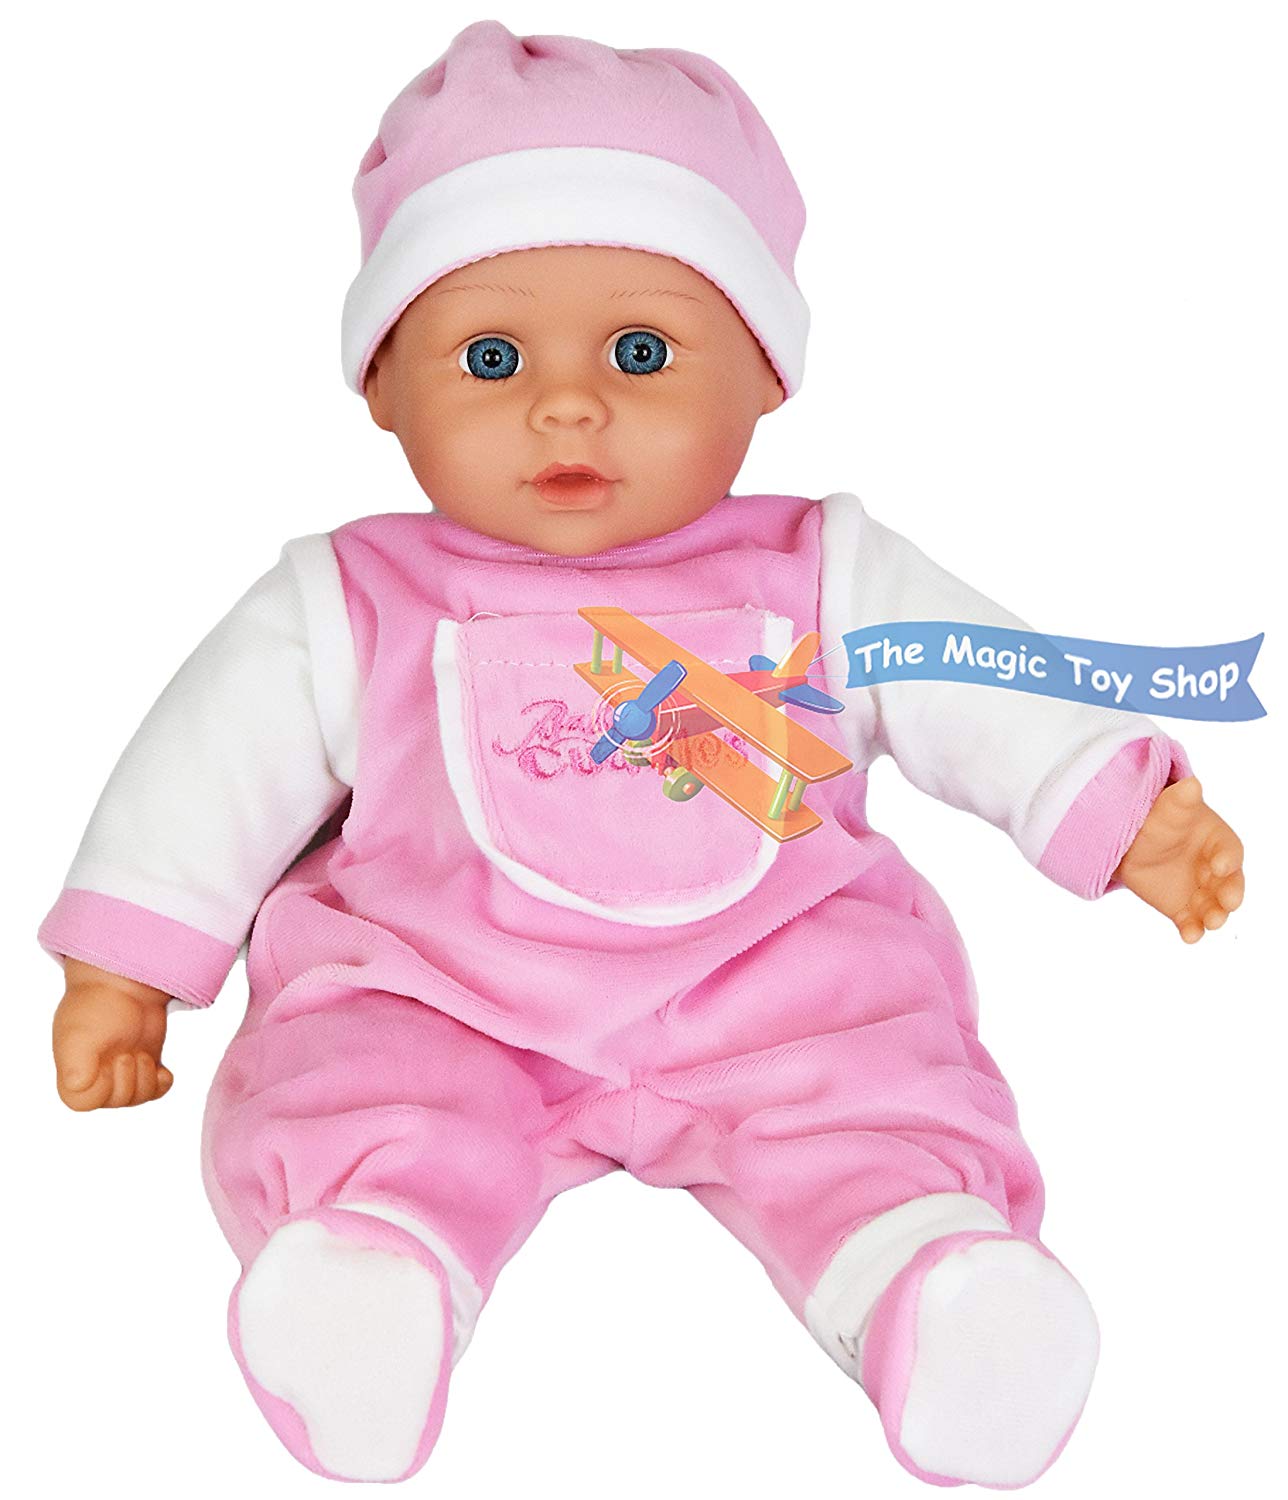 16 Sounds Crying Laughing New Born Soft Bodied Baby Doll Toy: Amazon ...